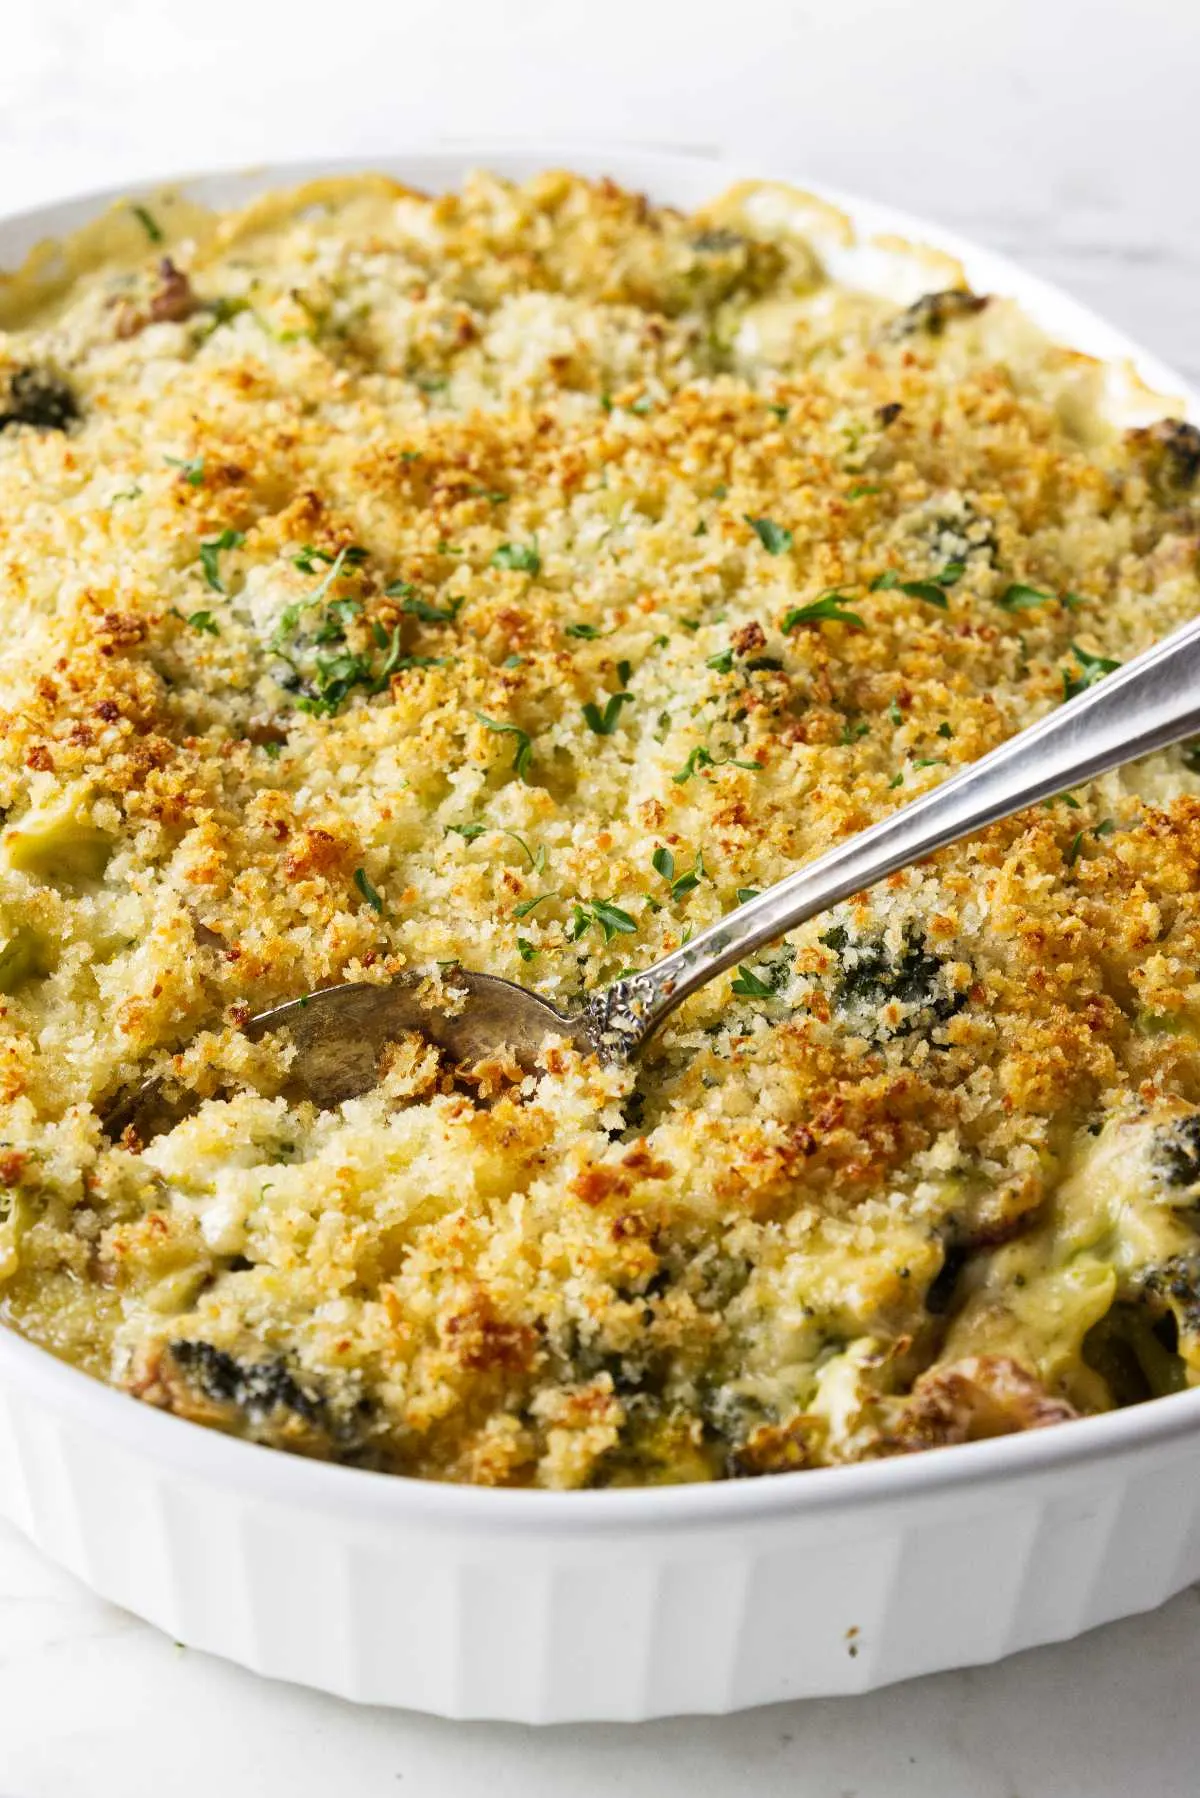 A casserole made with broccoli and cheese.